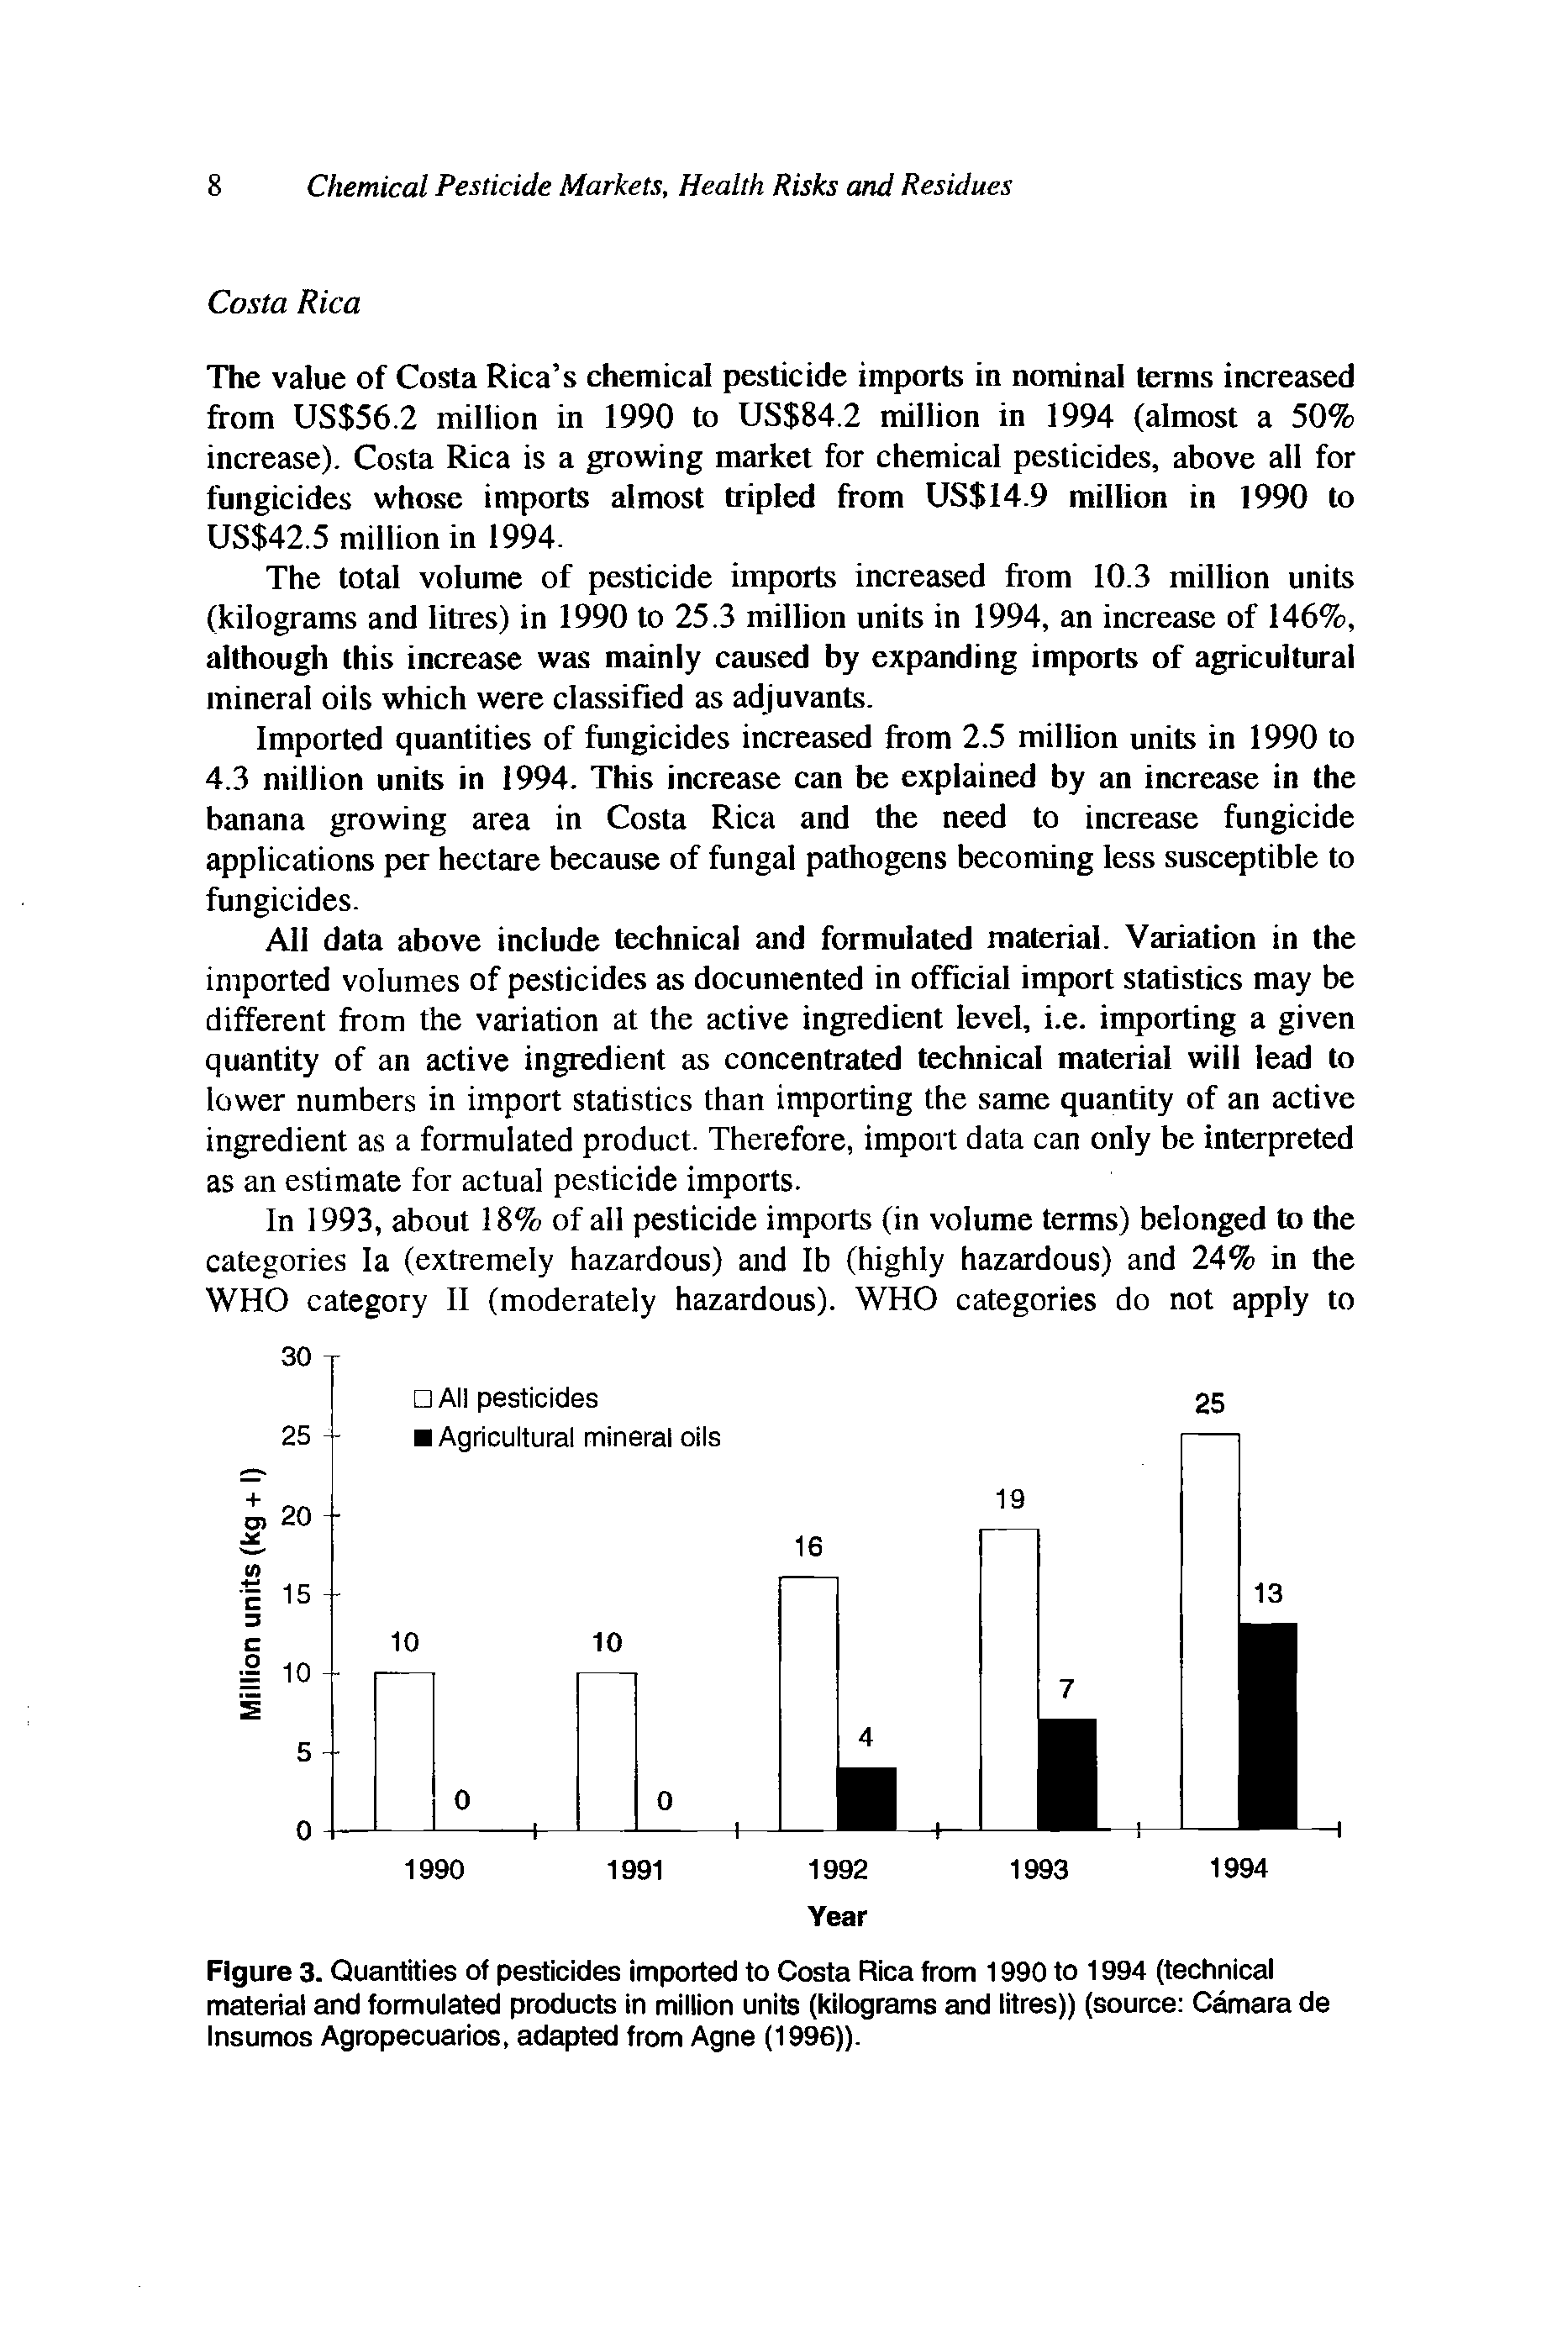 Figure 3. Quantities of pesticides imported to Costa Rica from 1990 to 1994 (technical material and formulated products in million units (kilograms and litres)) (source Camara de Insumos Agropecuarios, adapted from Agne (1996)).